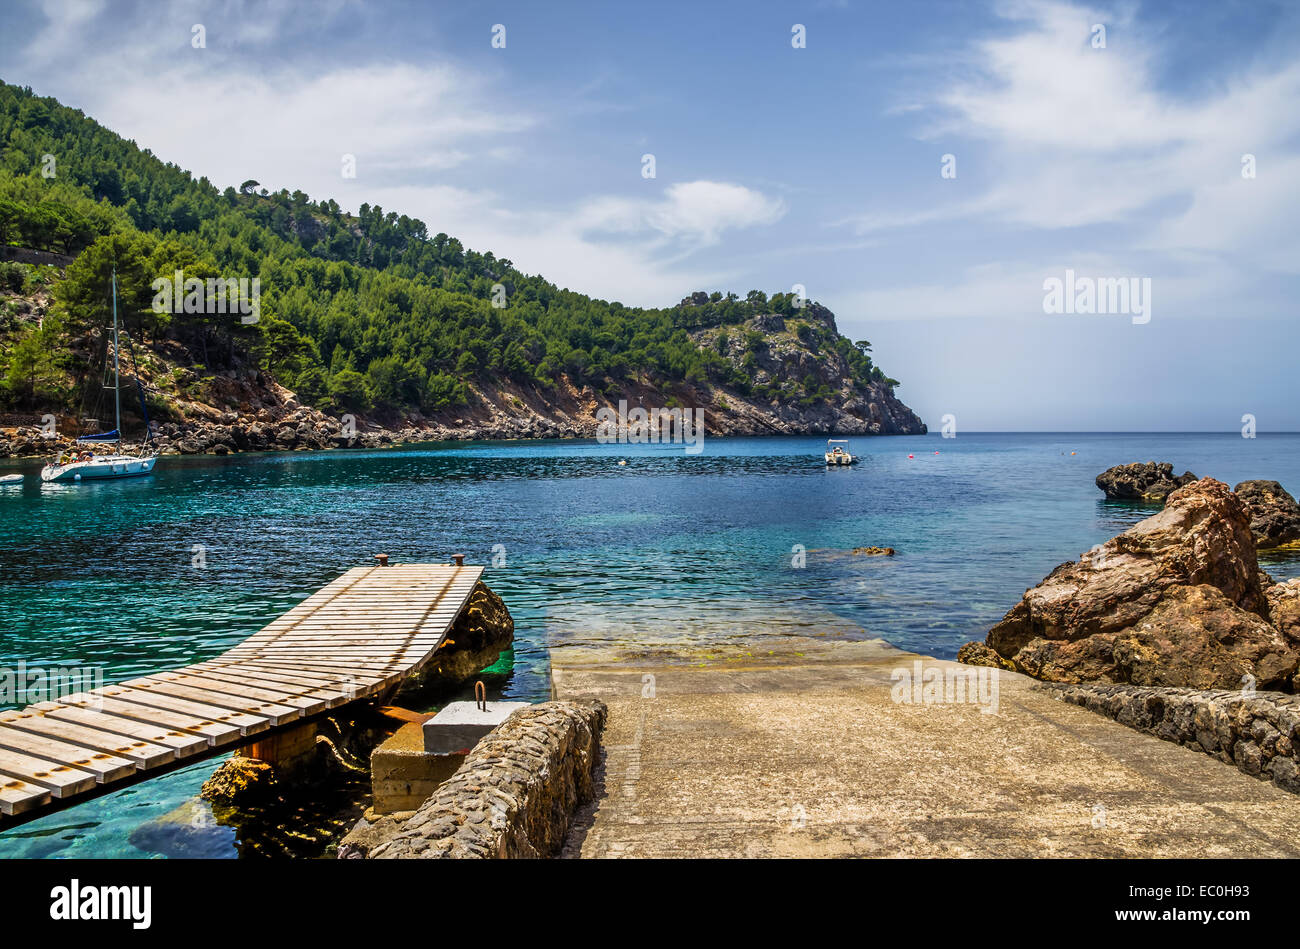 Launching ramp into the sea for small yachts and boats along side a wooden jetty with forest background on a promontory. Stock Photo